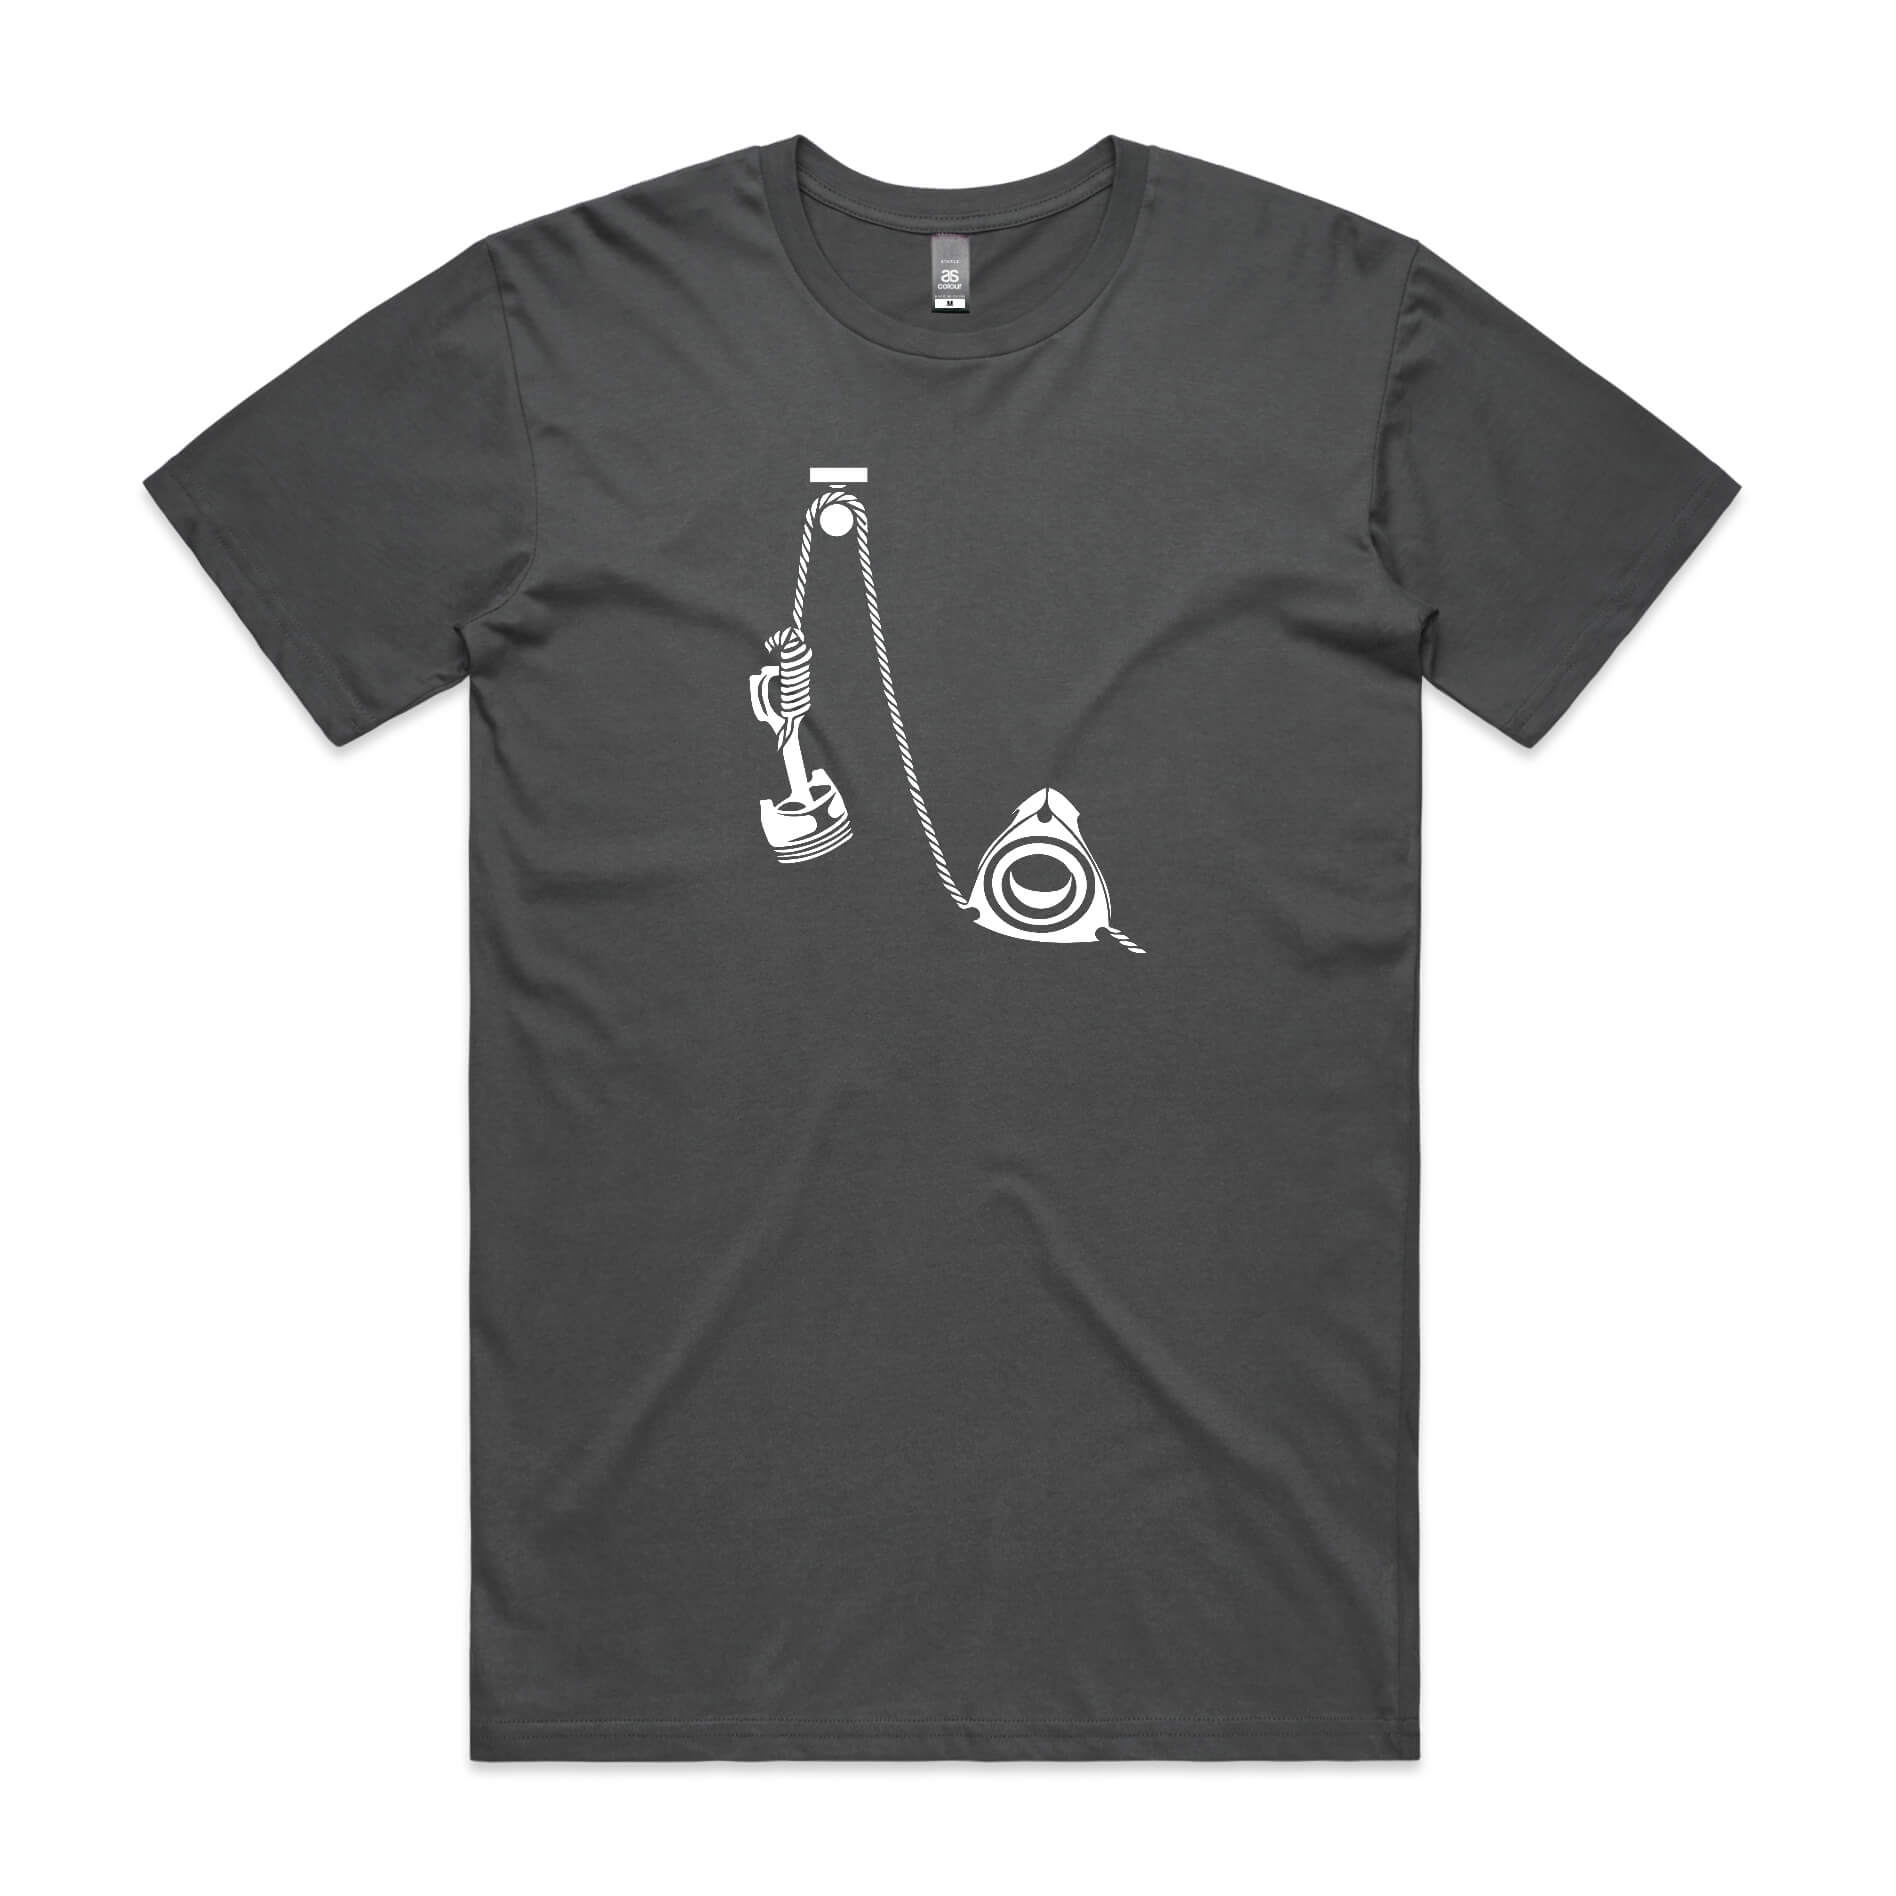 Rotary hangs piston t-shirt in charcoal grey featuring a white cartoon of a rotary holding a piston in a noose